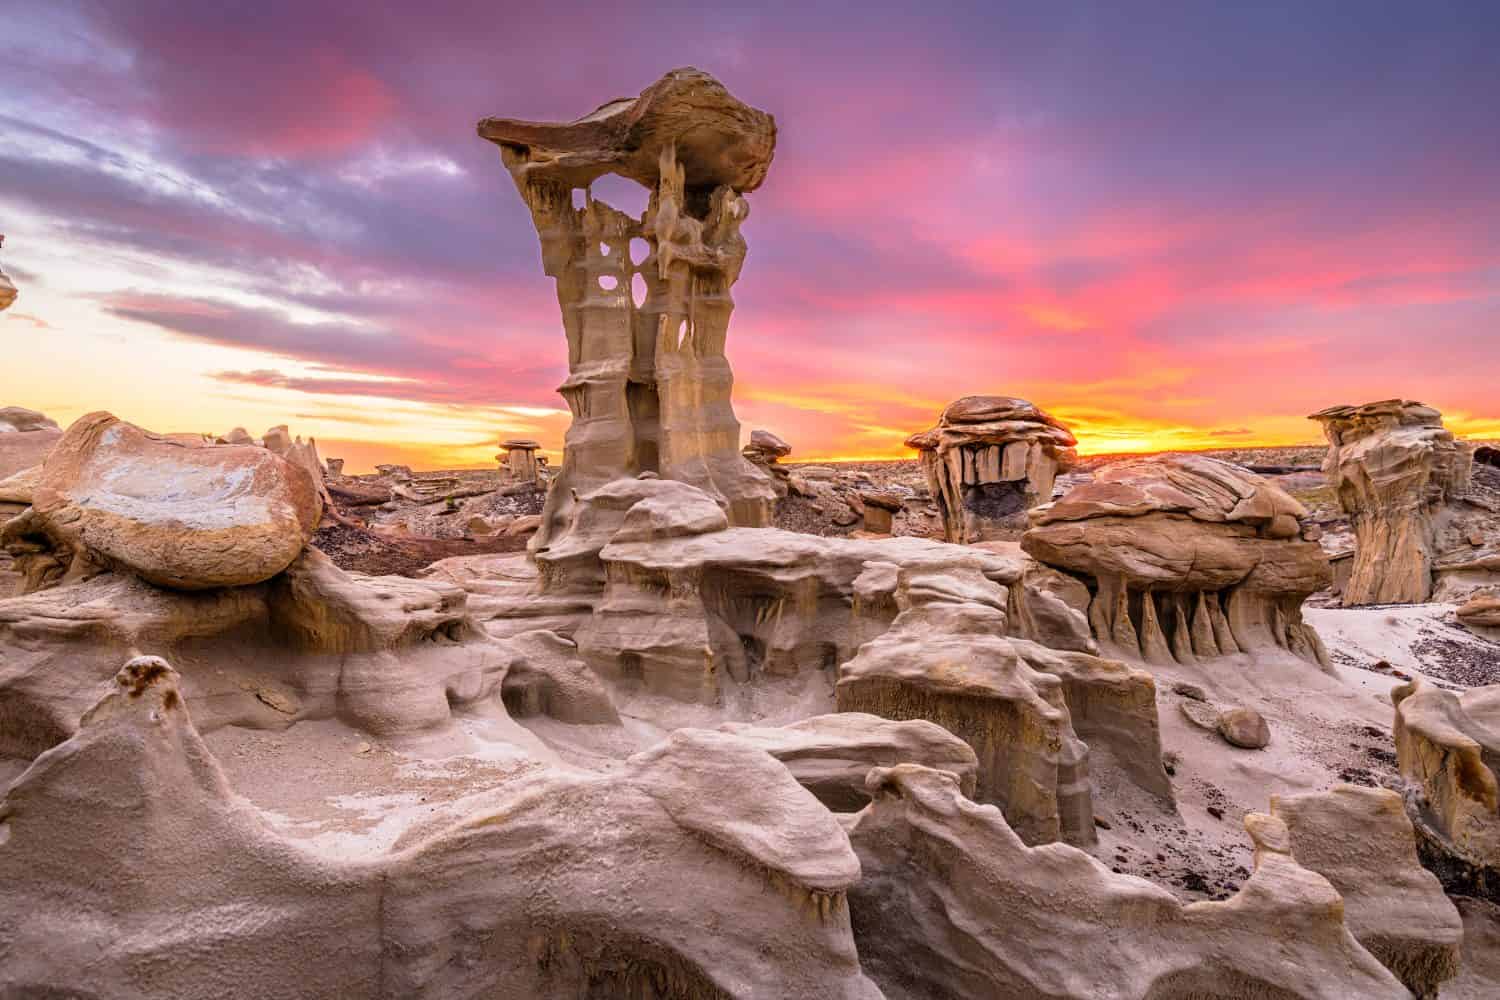 Bisti/De-Na-Zin Wilderness, New Mexico, USA at Alien Throne after sunset.